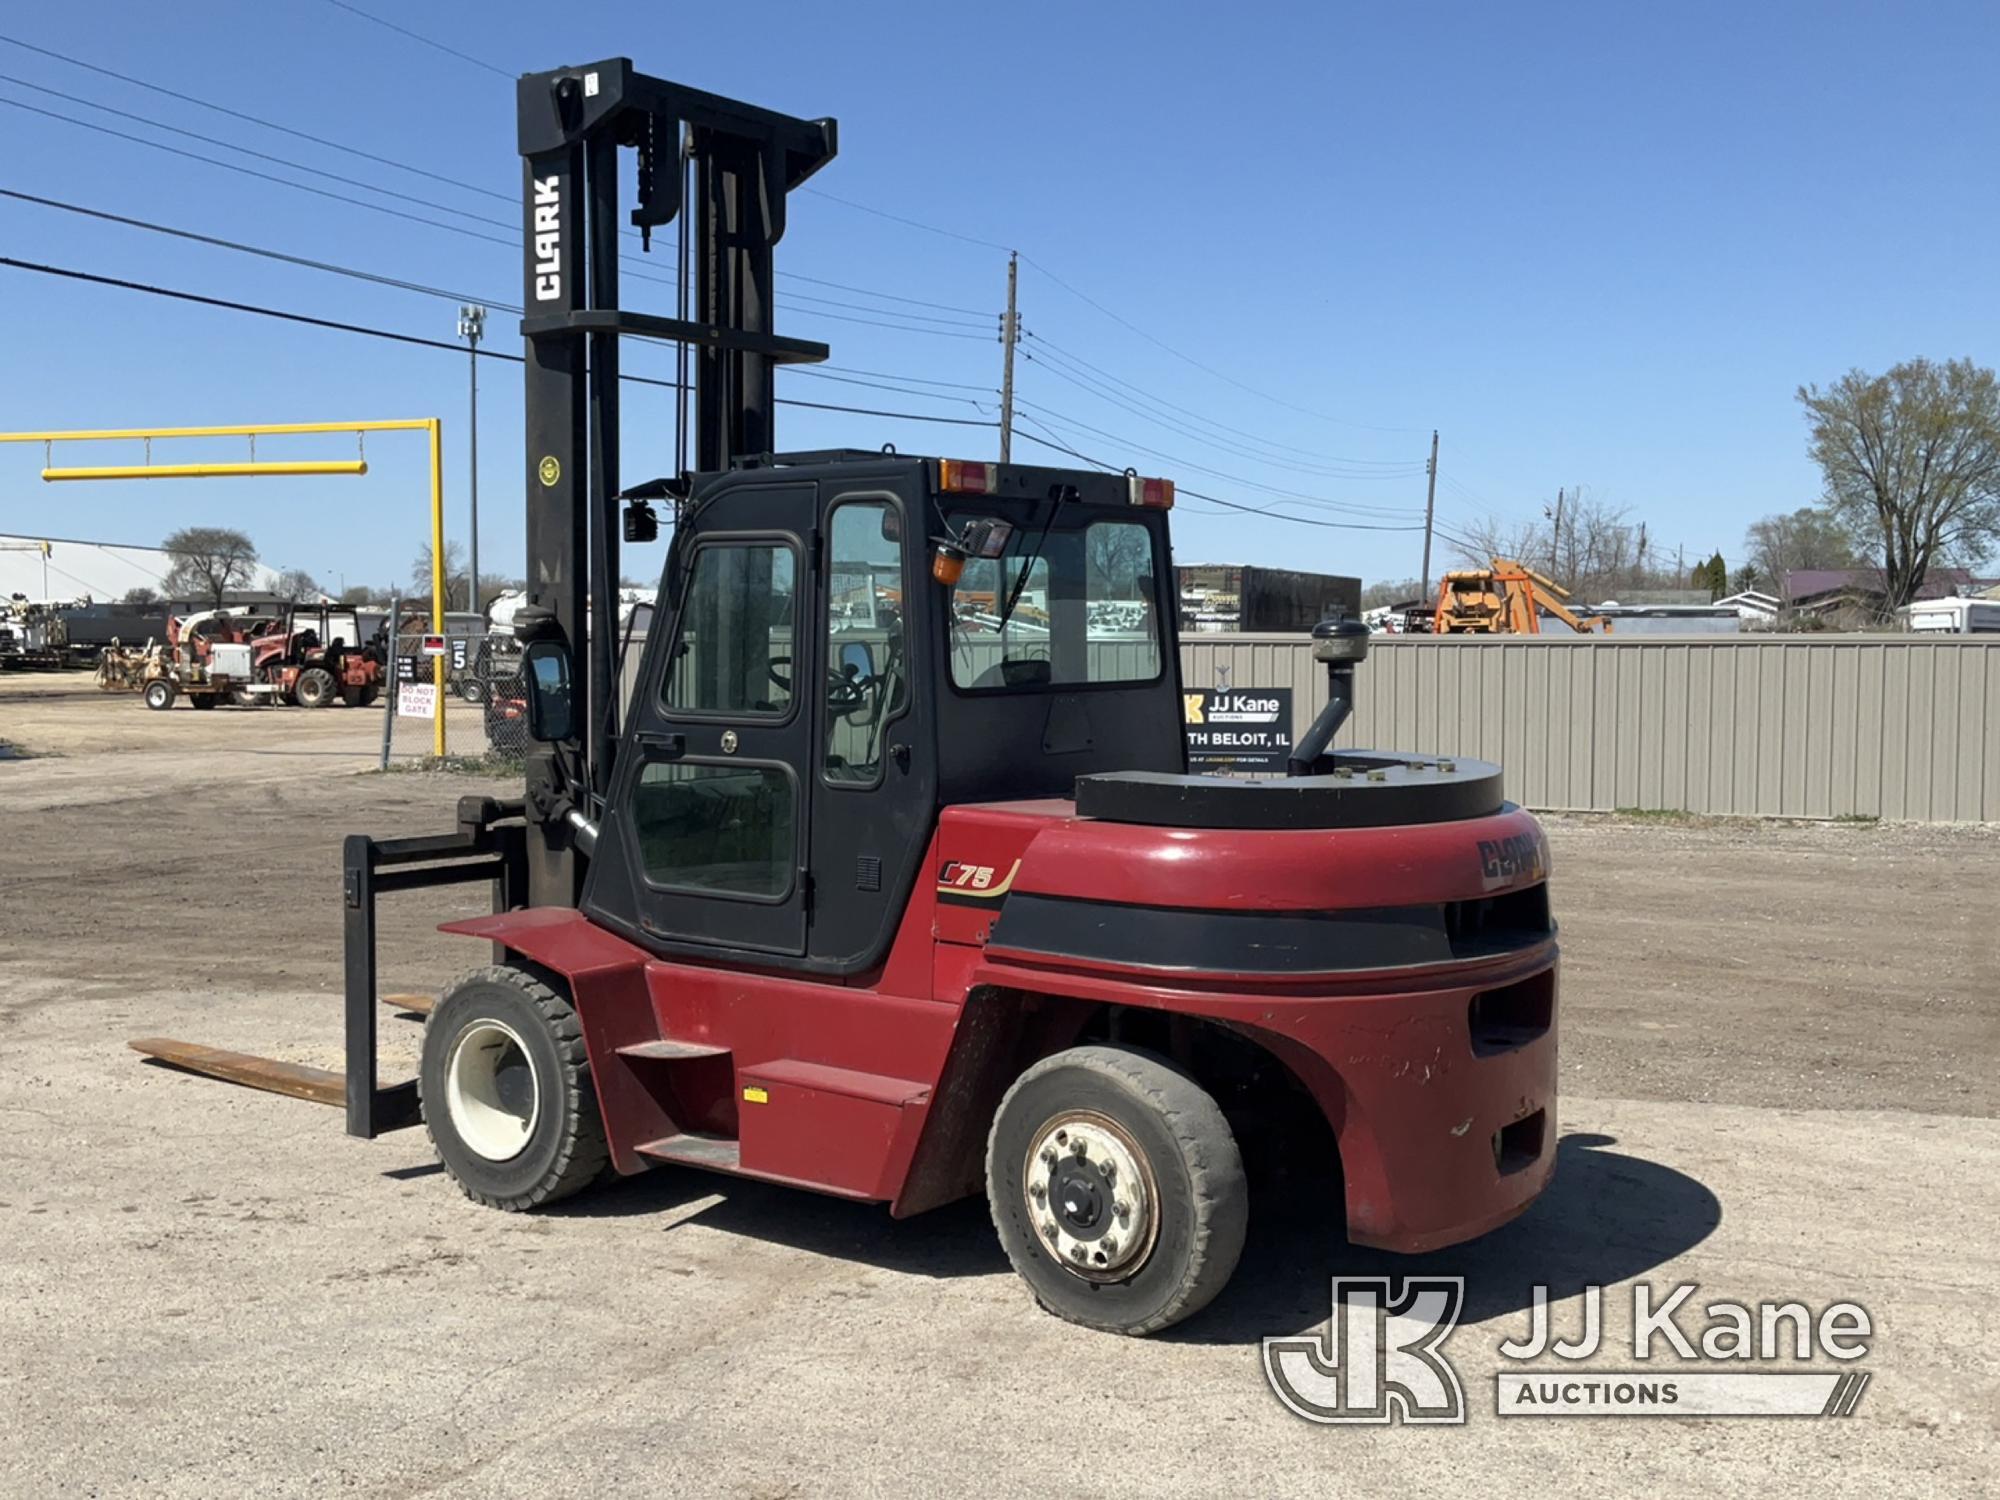 (South Beloit, IL) 2016 Clark C75L Solid Tired Forklift, Indoor warehoused used. Runs & Operates, LP